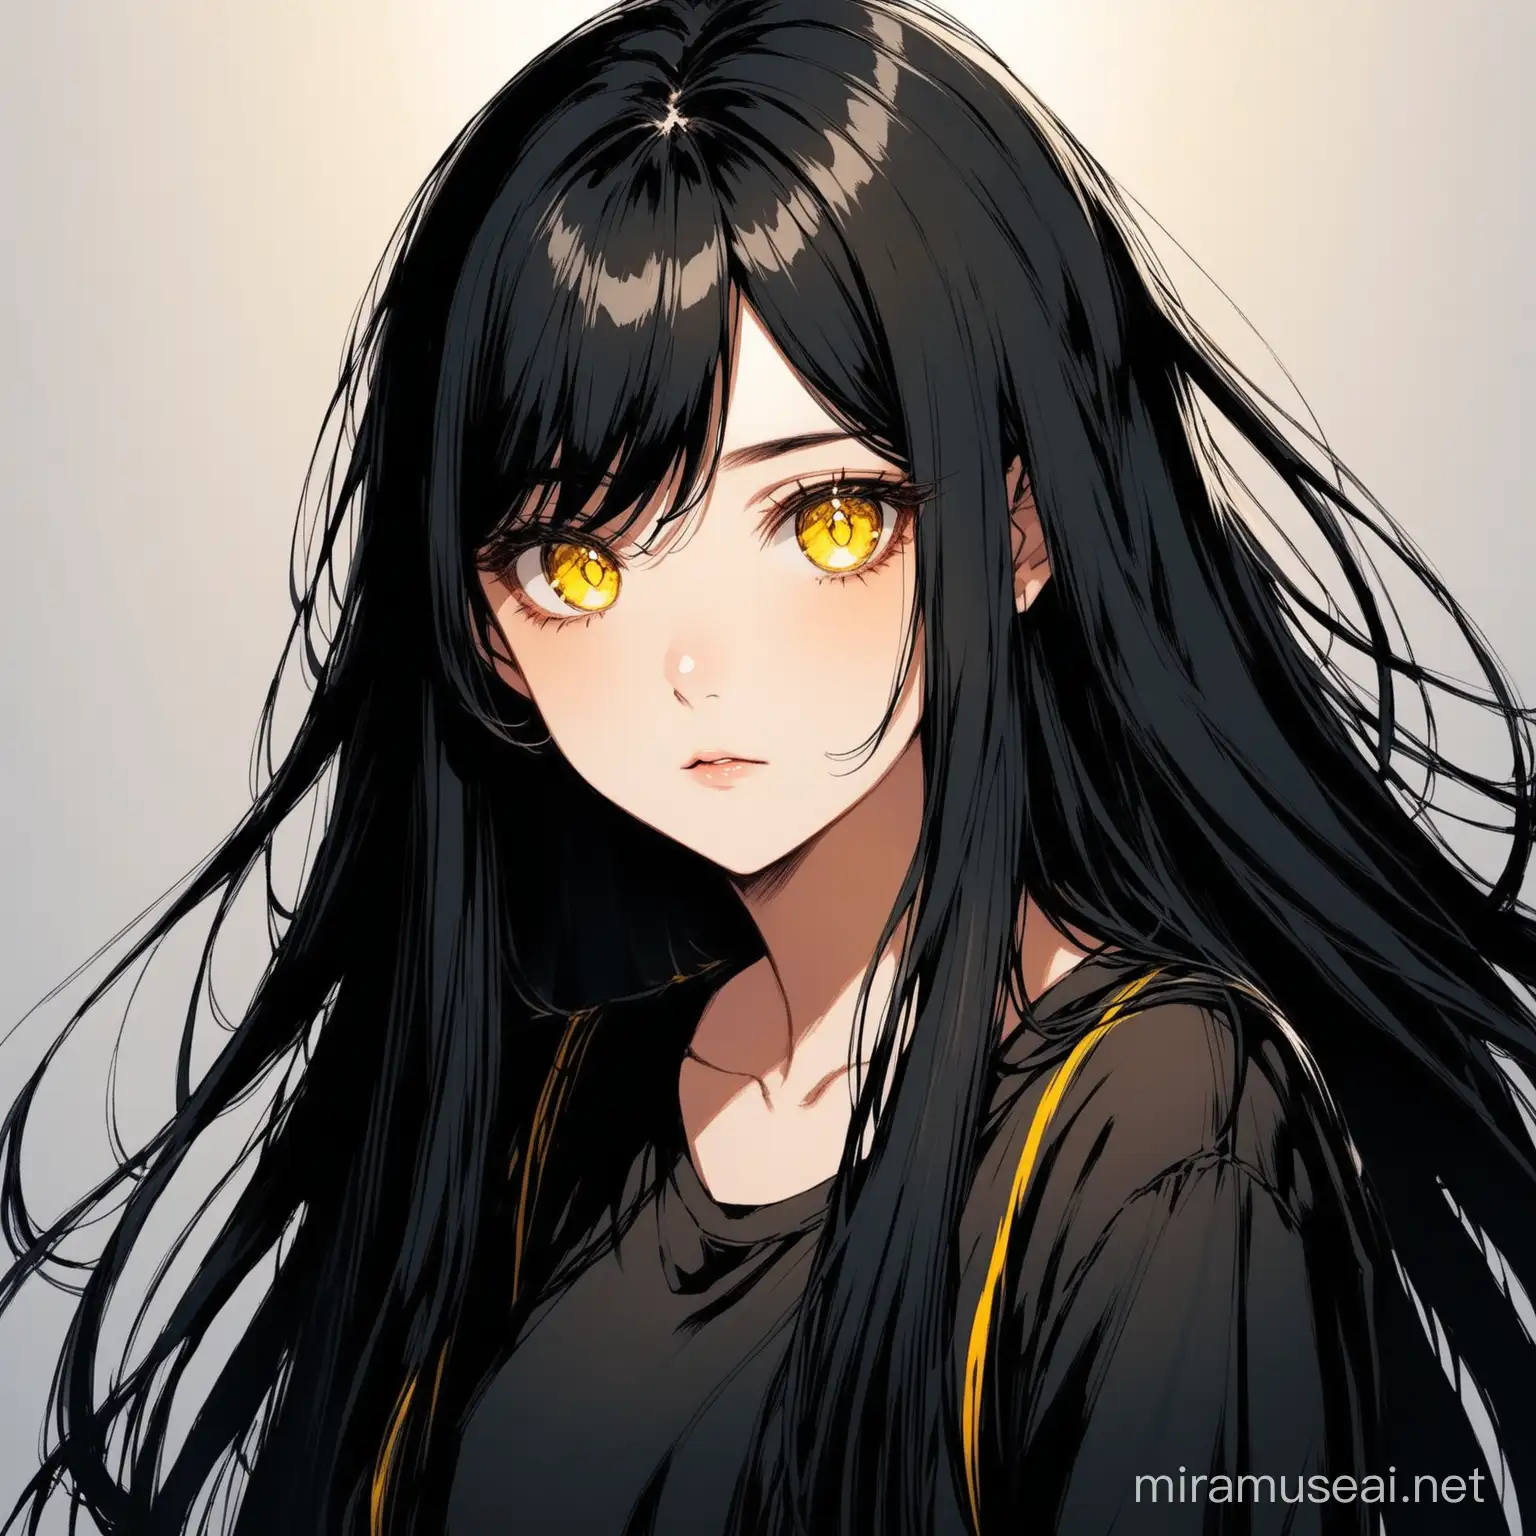 Girl with yellow eyes and long black hair